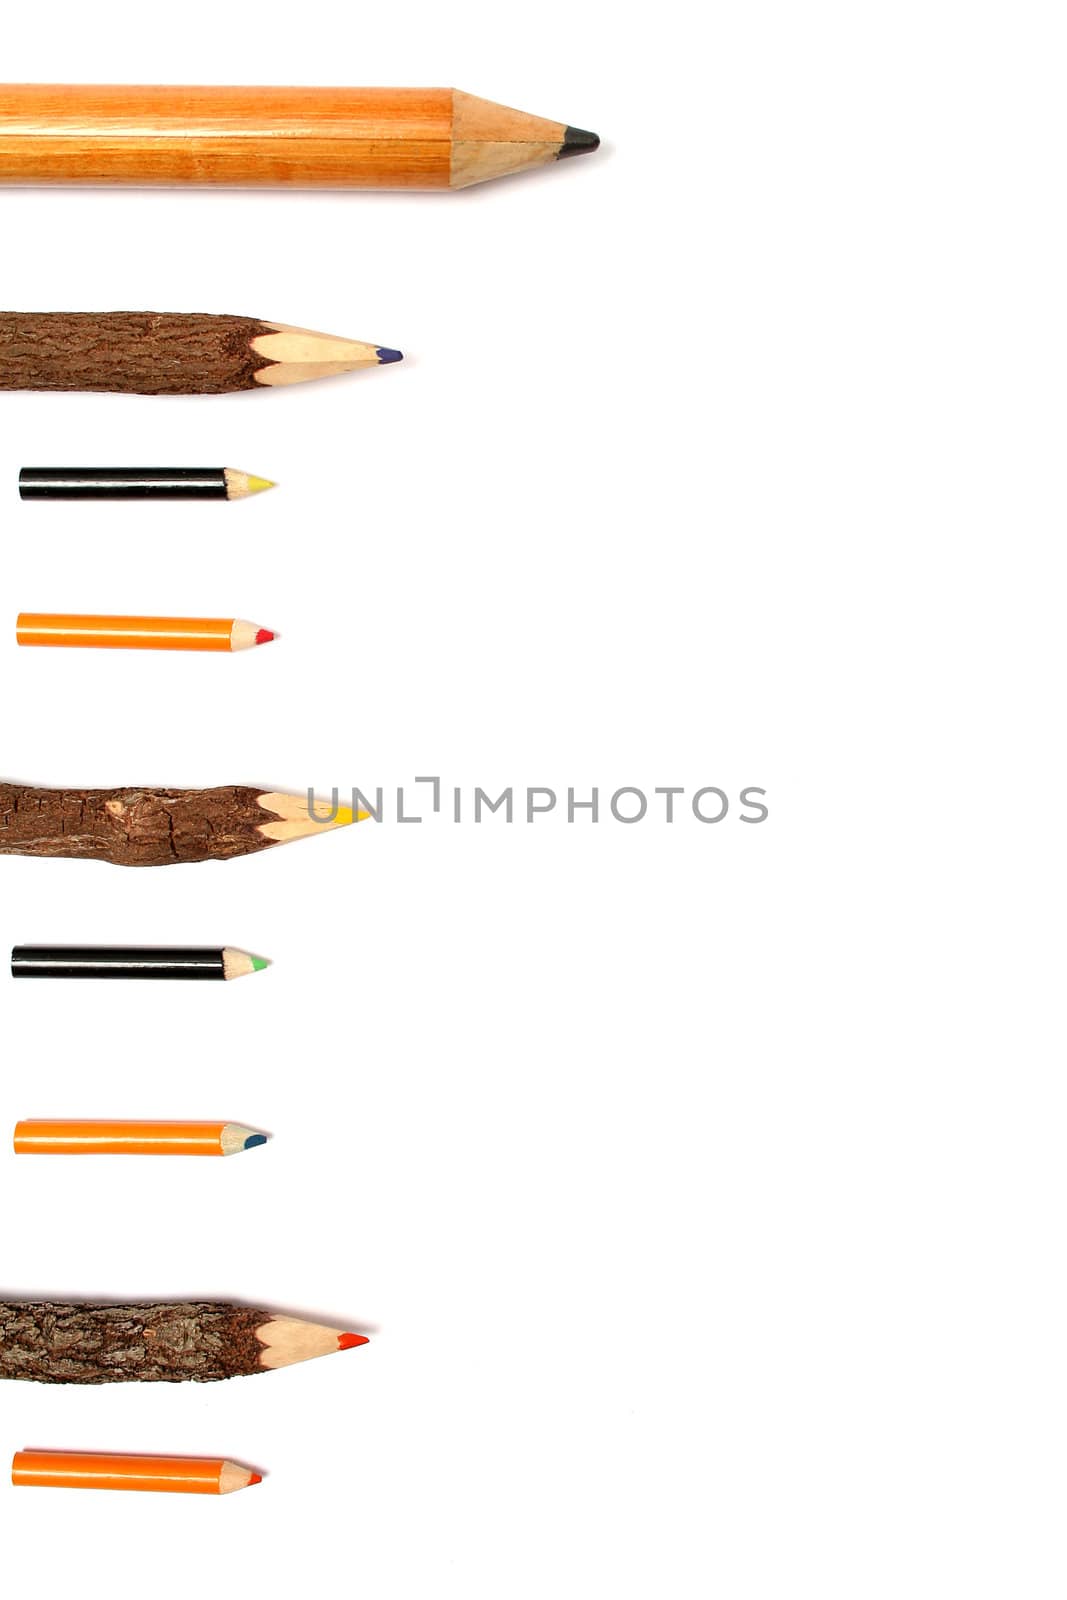 Bulleted list made of color pencils of the various size by parrus